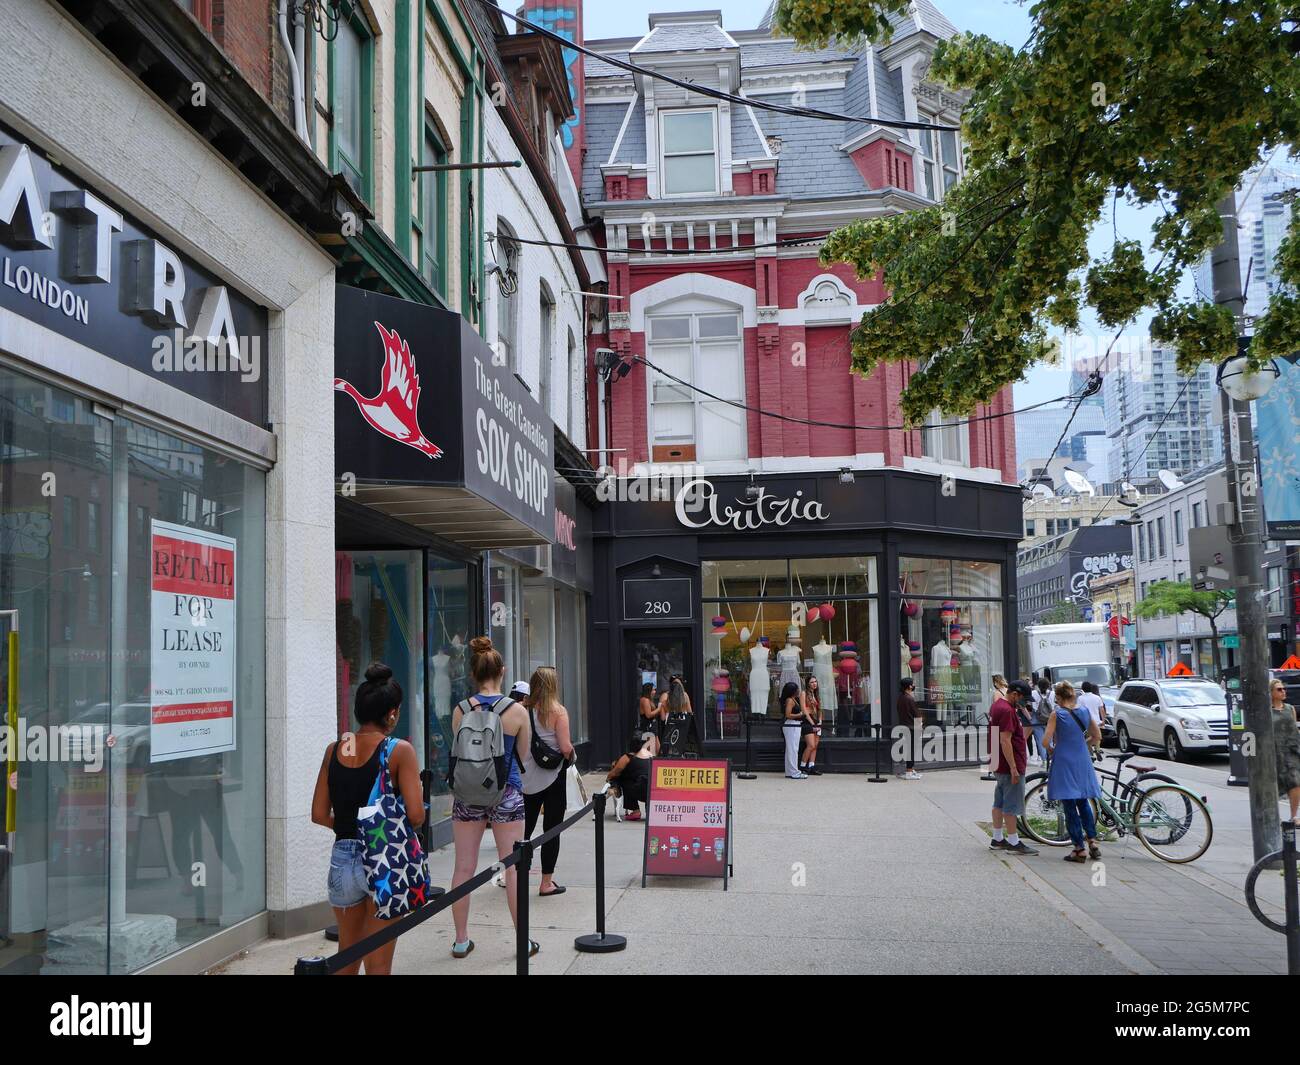 Toronto, Canada - June 28, 2021:  Shoppers line up outside a clothing store on Queen Street West, as the pandemic forces retailers to limit entry. Stock Photo